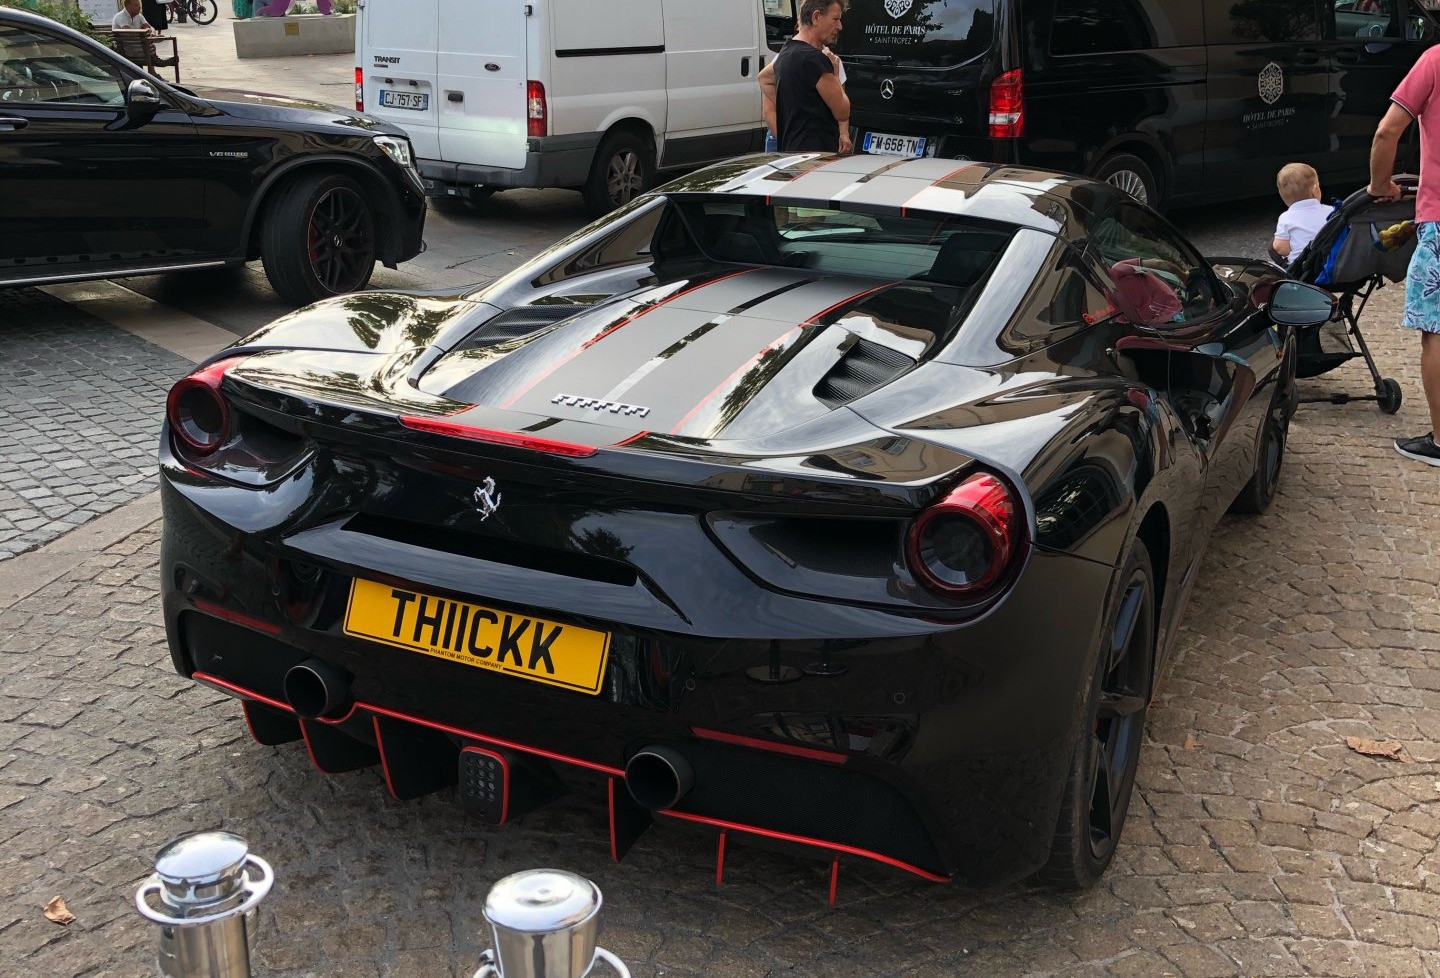 A Ferrari driver with a 'TH11CKK' personalised reg plate was caught doing almost 100mph on a motorway